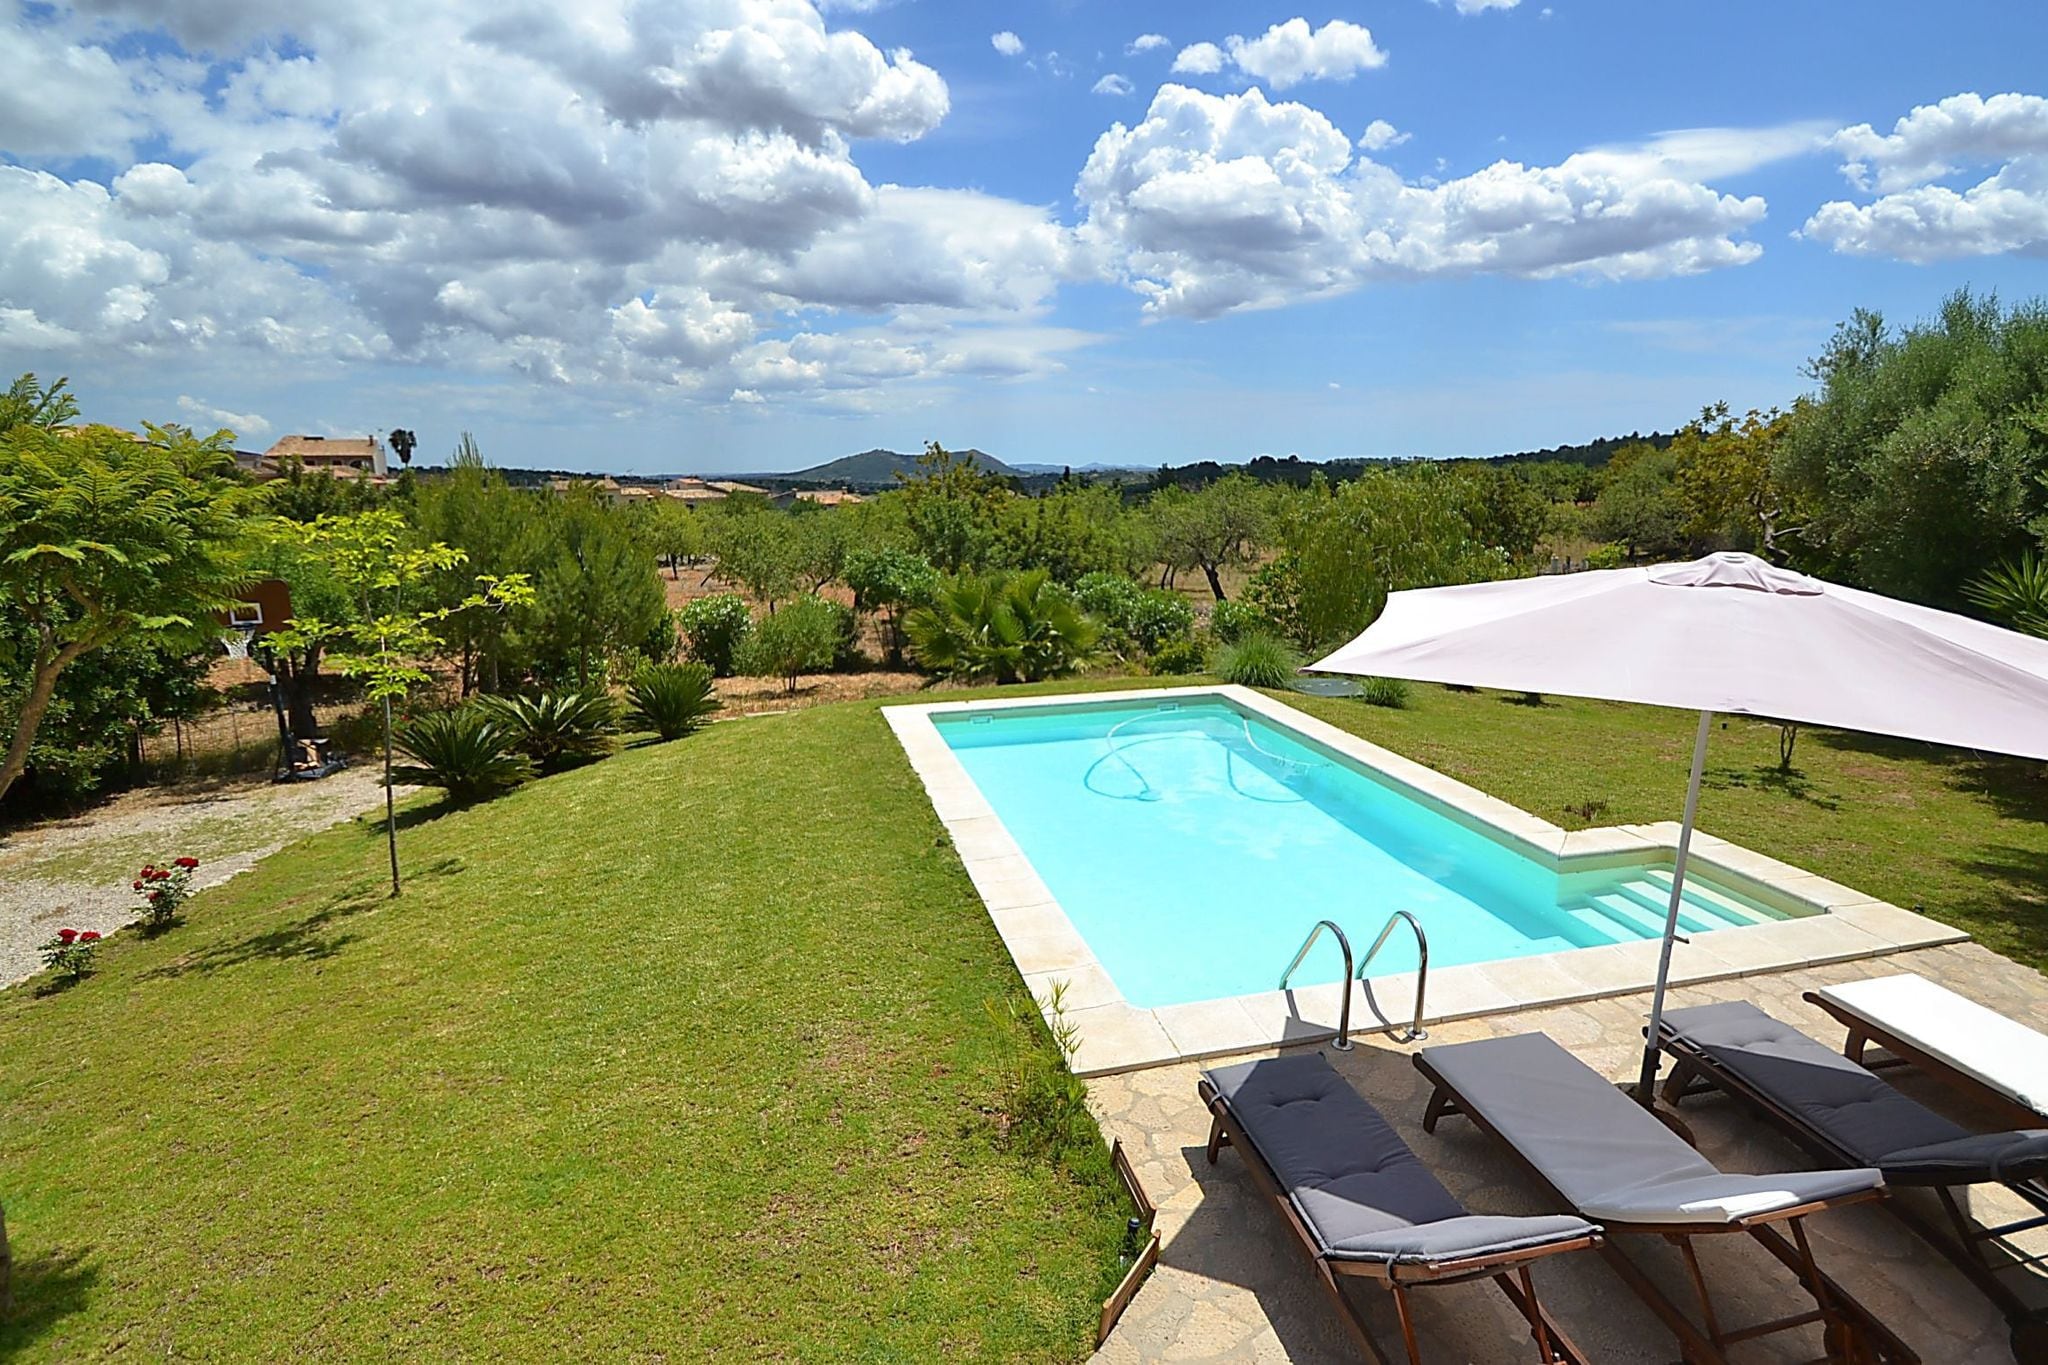 Beautiful townhouse with pool and panoramic view, surrounded by the countryside